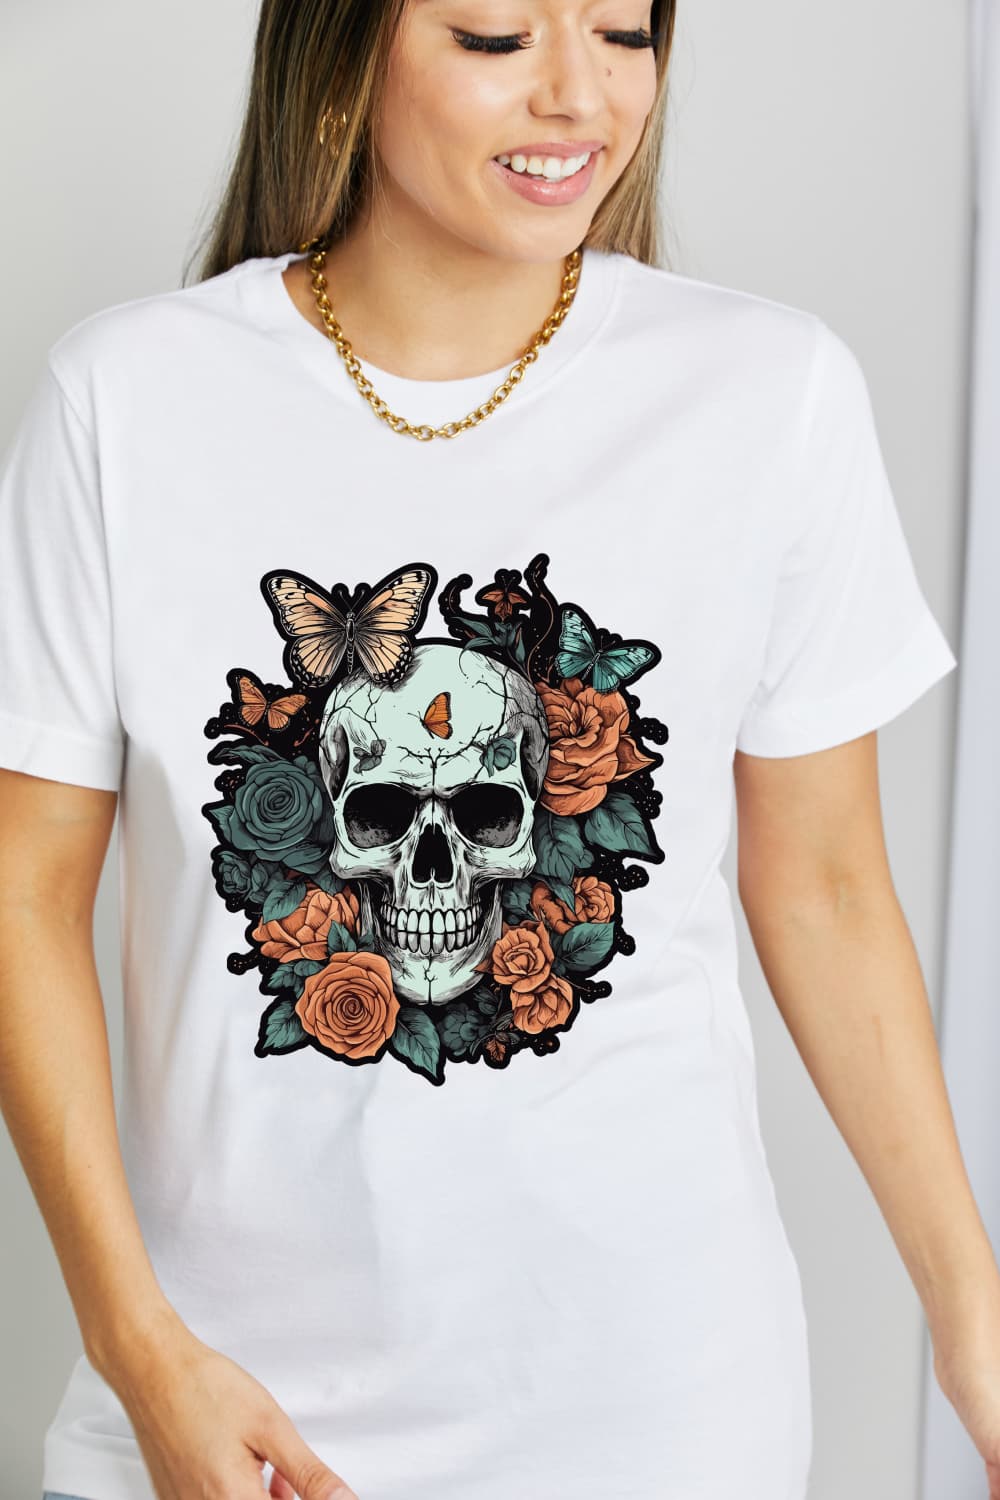 Simply Love Full Size Skull Graphic Cotton T-Shirt